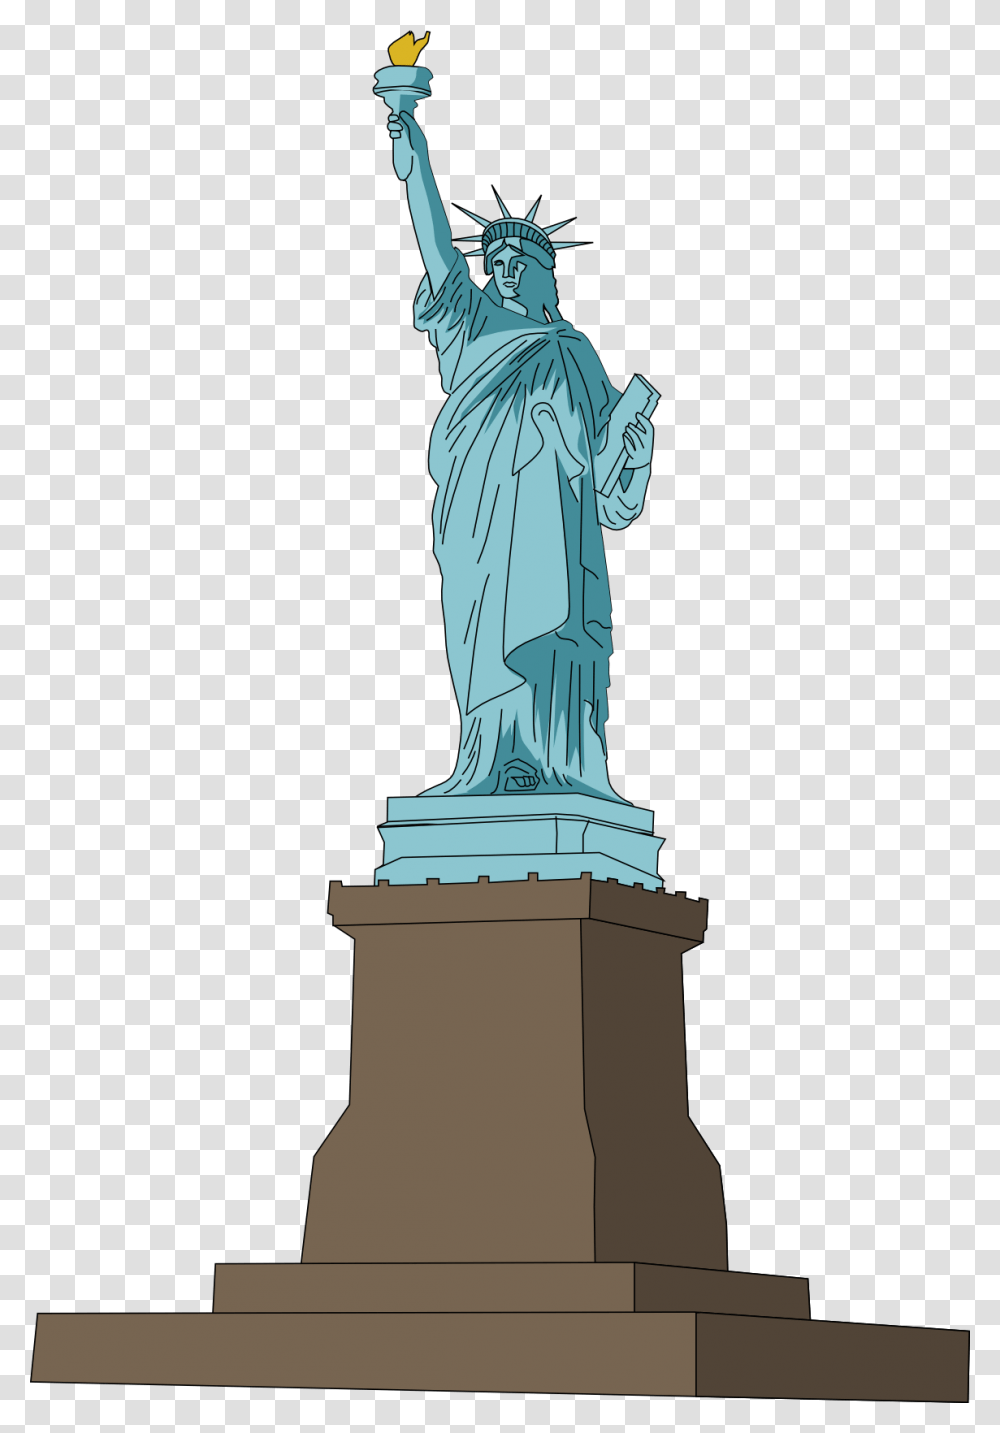 Free To Use Amp Public Domain Monuments Clip Art Statue Of Liberty, Sculpture, Person, Human, Archaeology Transparent Png